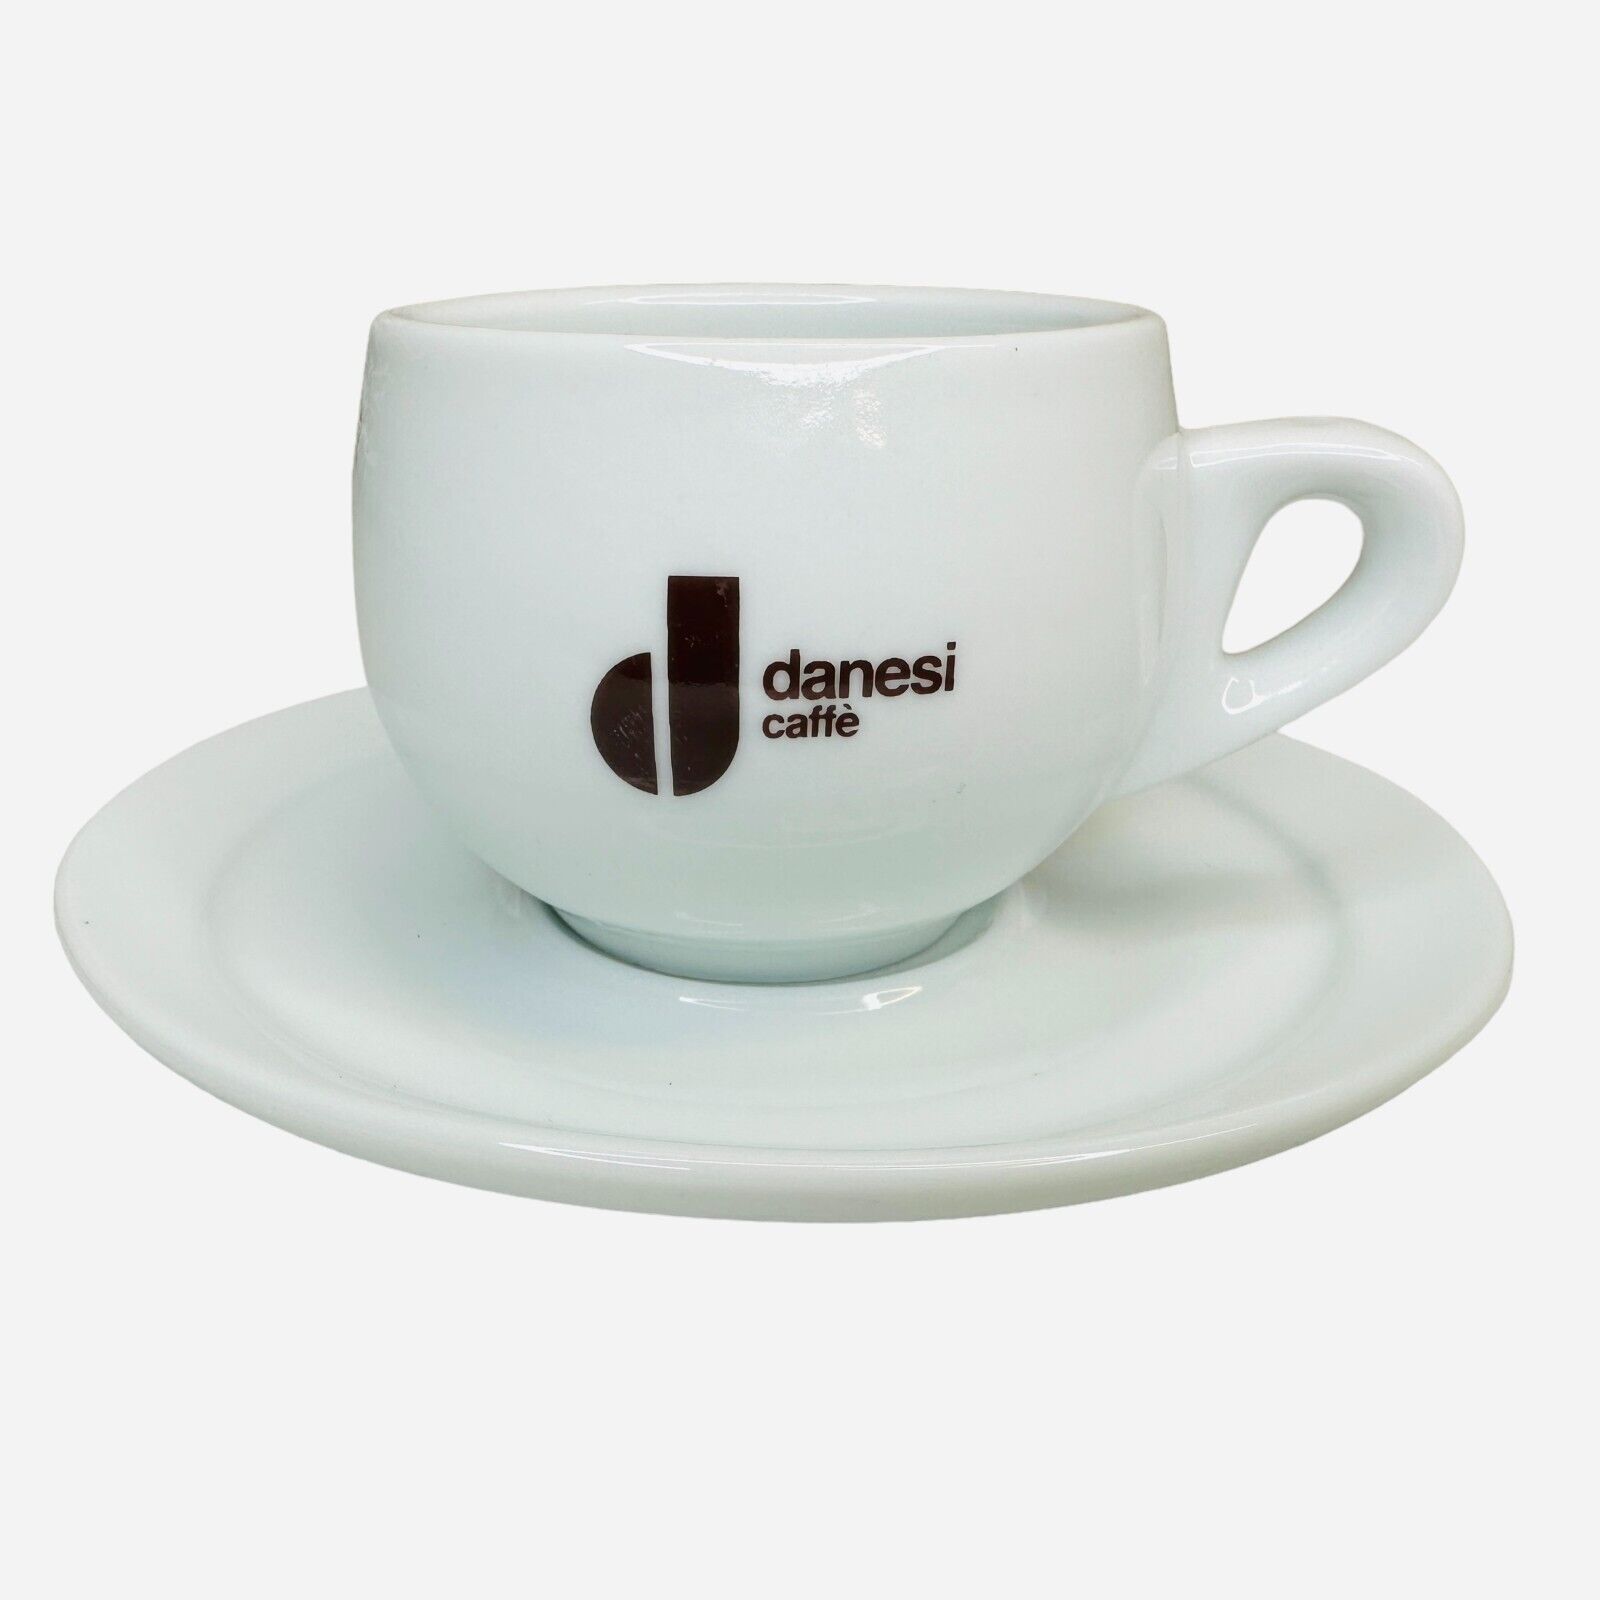 Danesi Cafe White Porcelain Cappuccino/Latte Coffee Cup & Saucer Plate